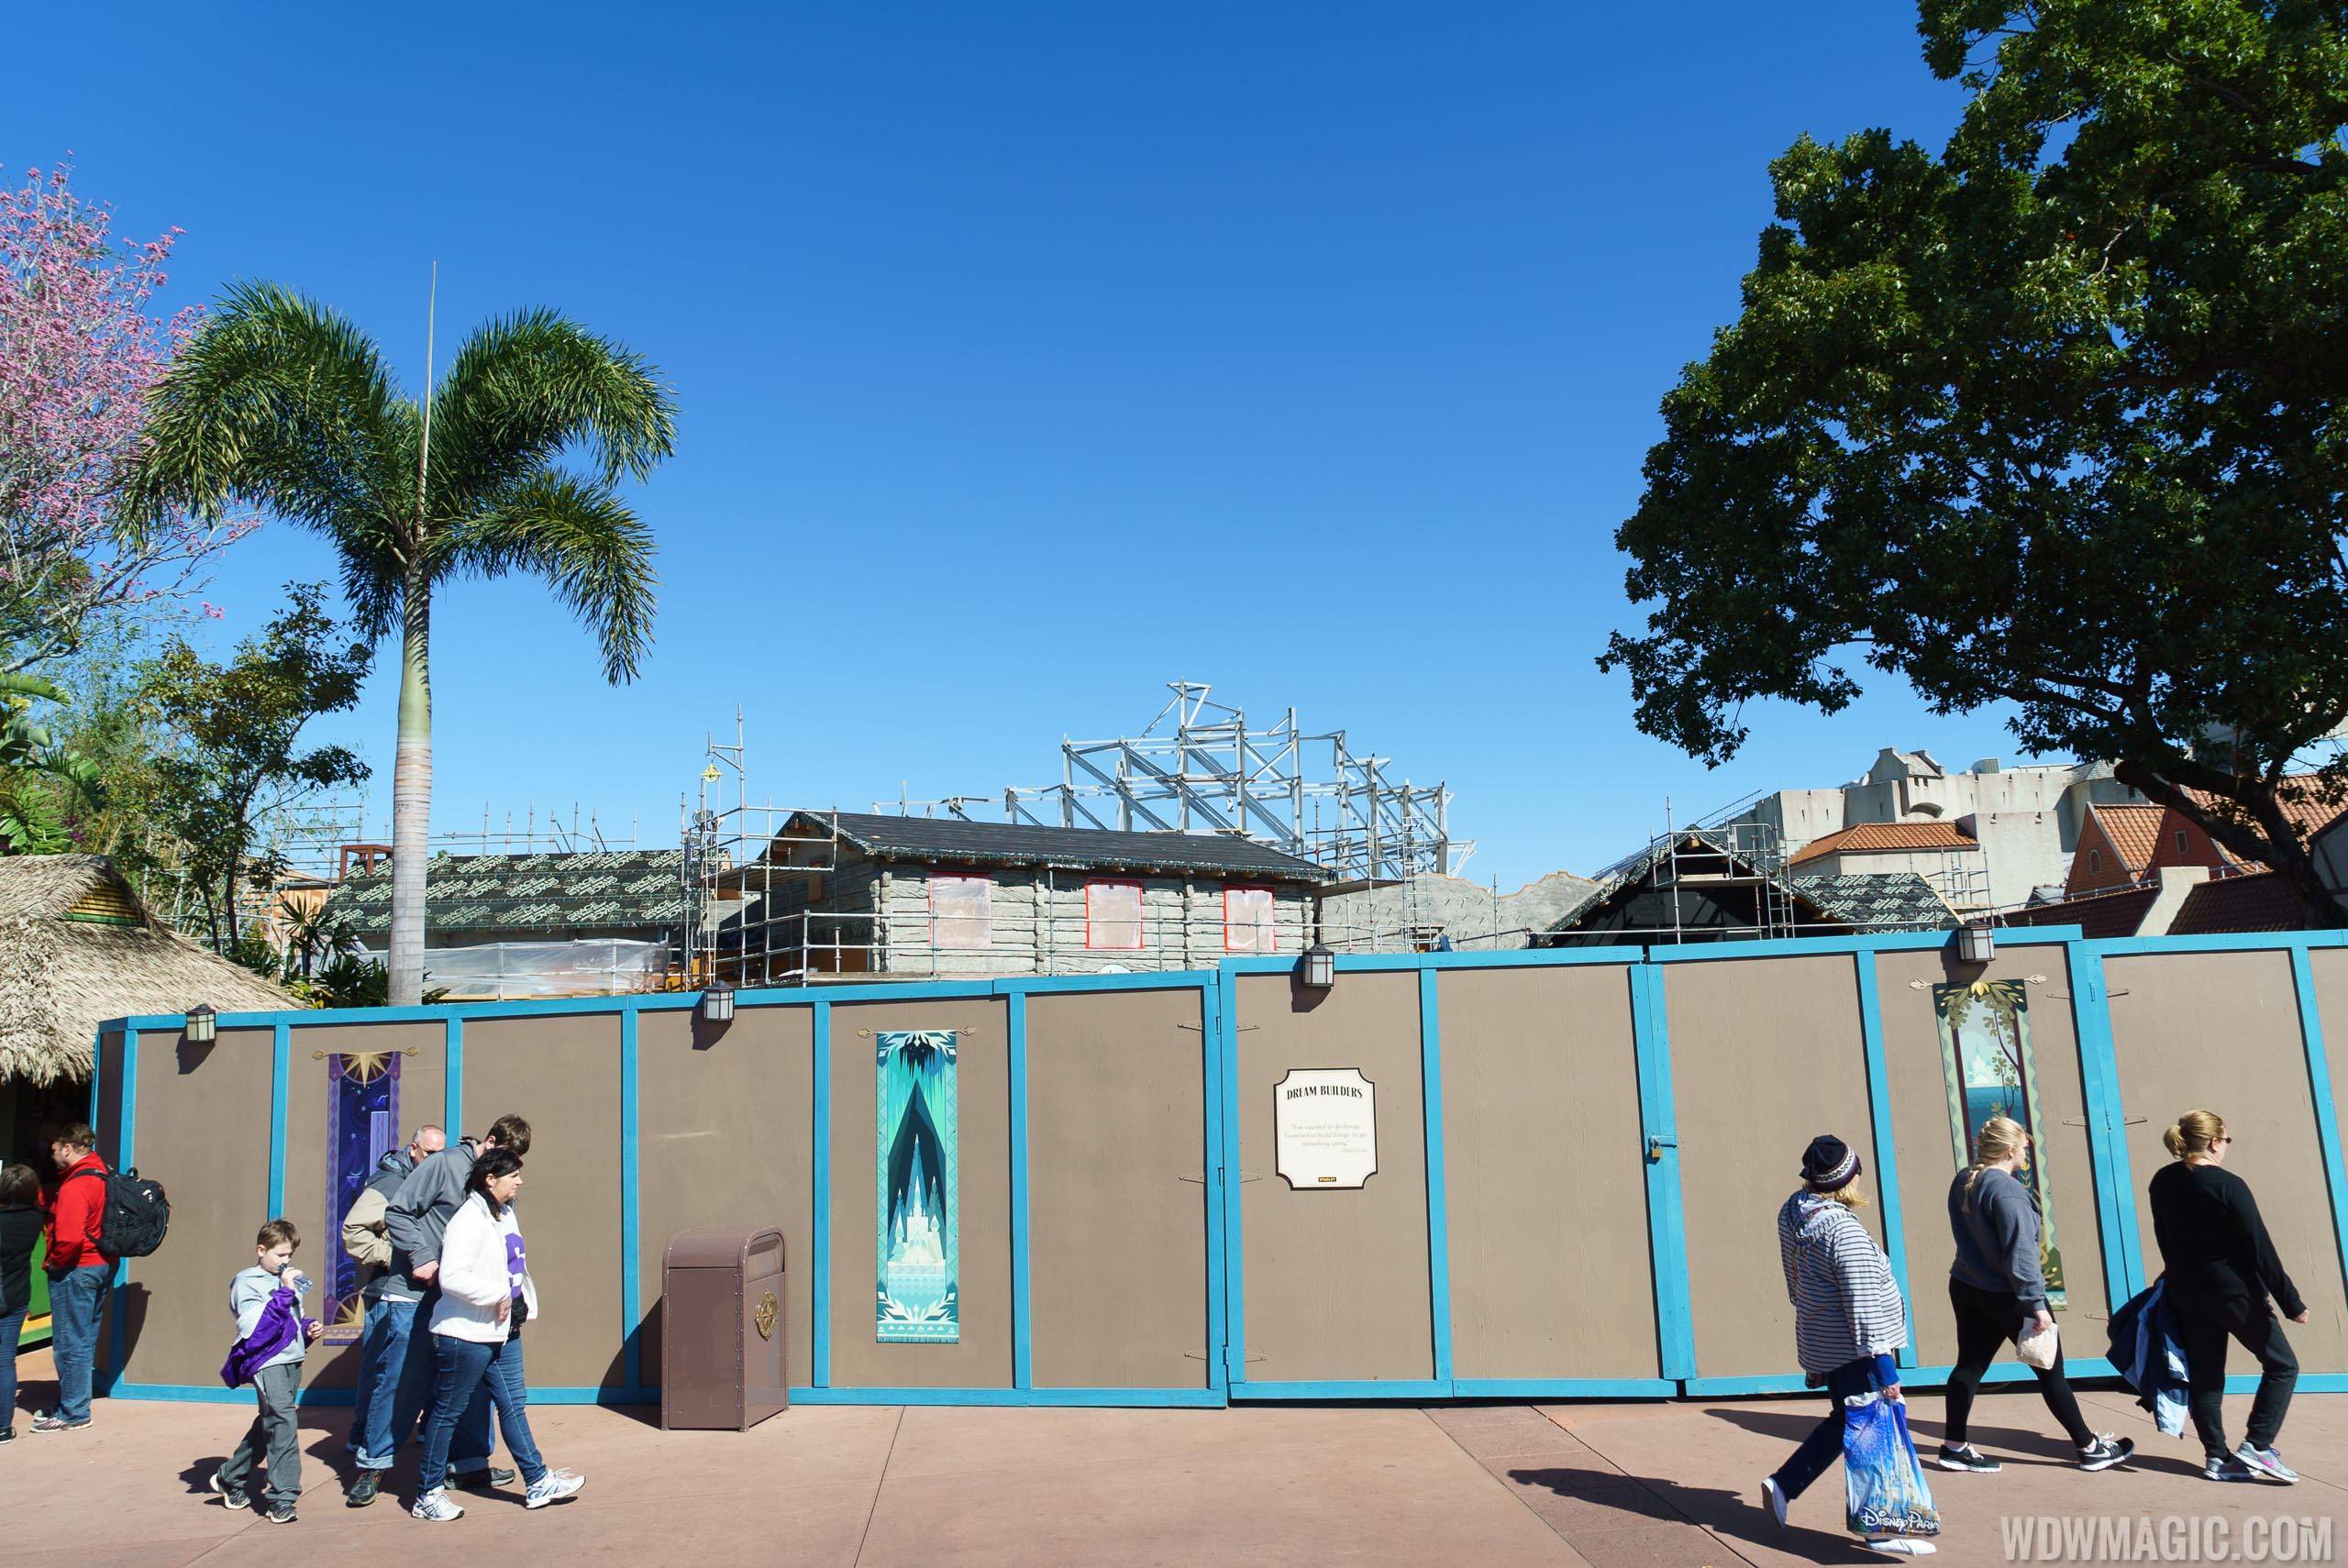 Royal Sommerhus Frozen meet and greet construction